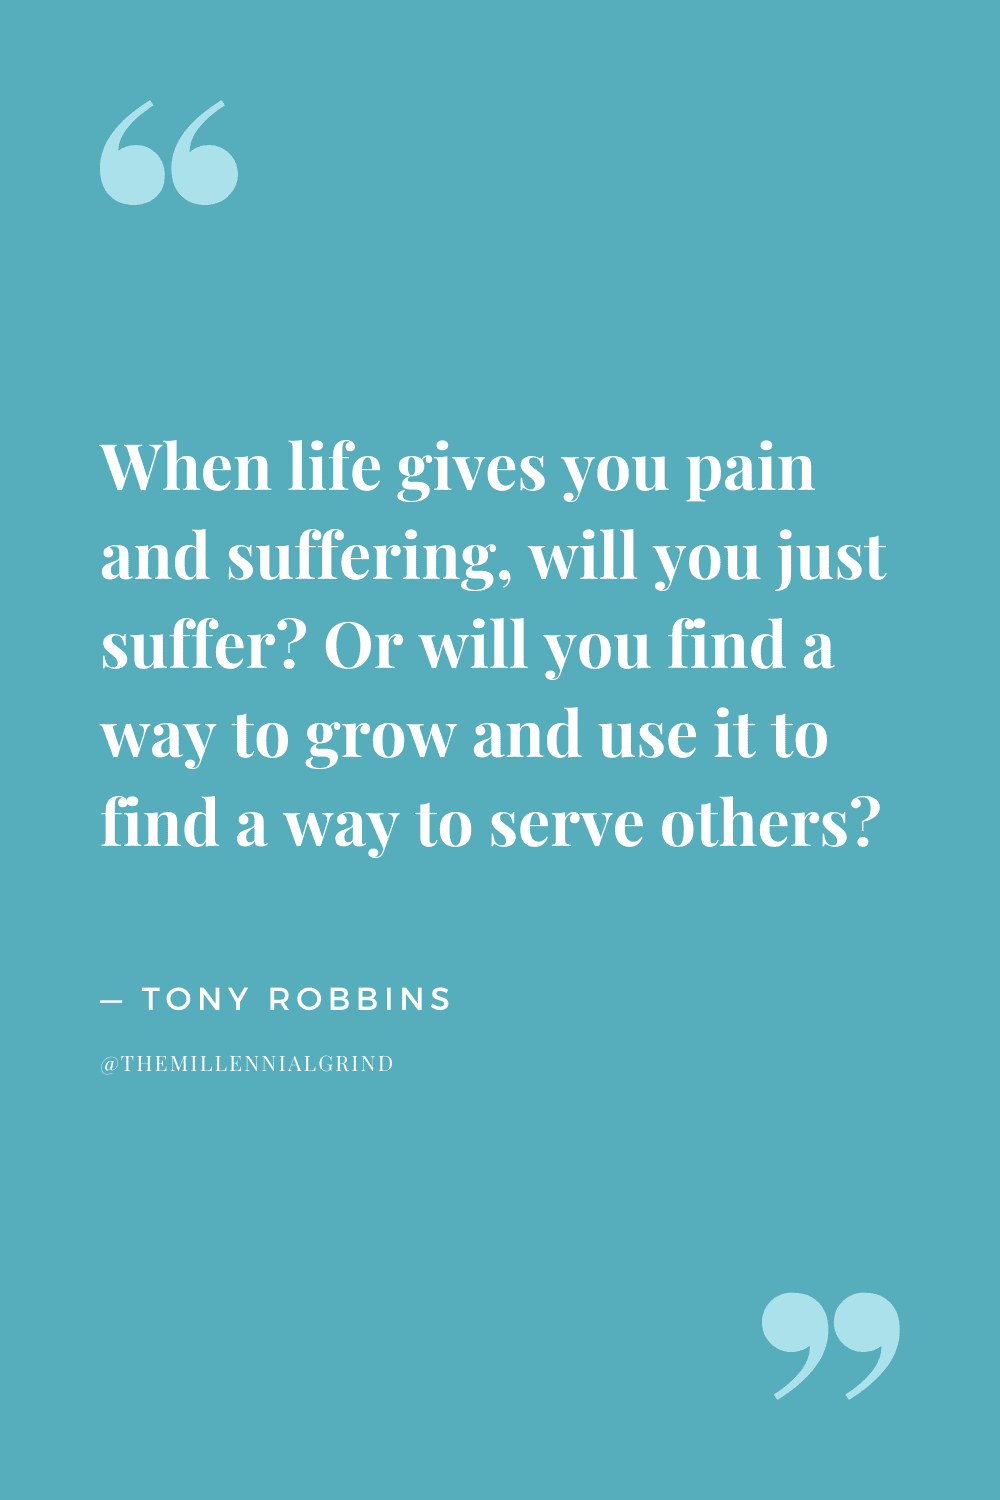 Quotes from Life Force by Tony Robbins